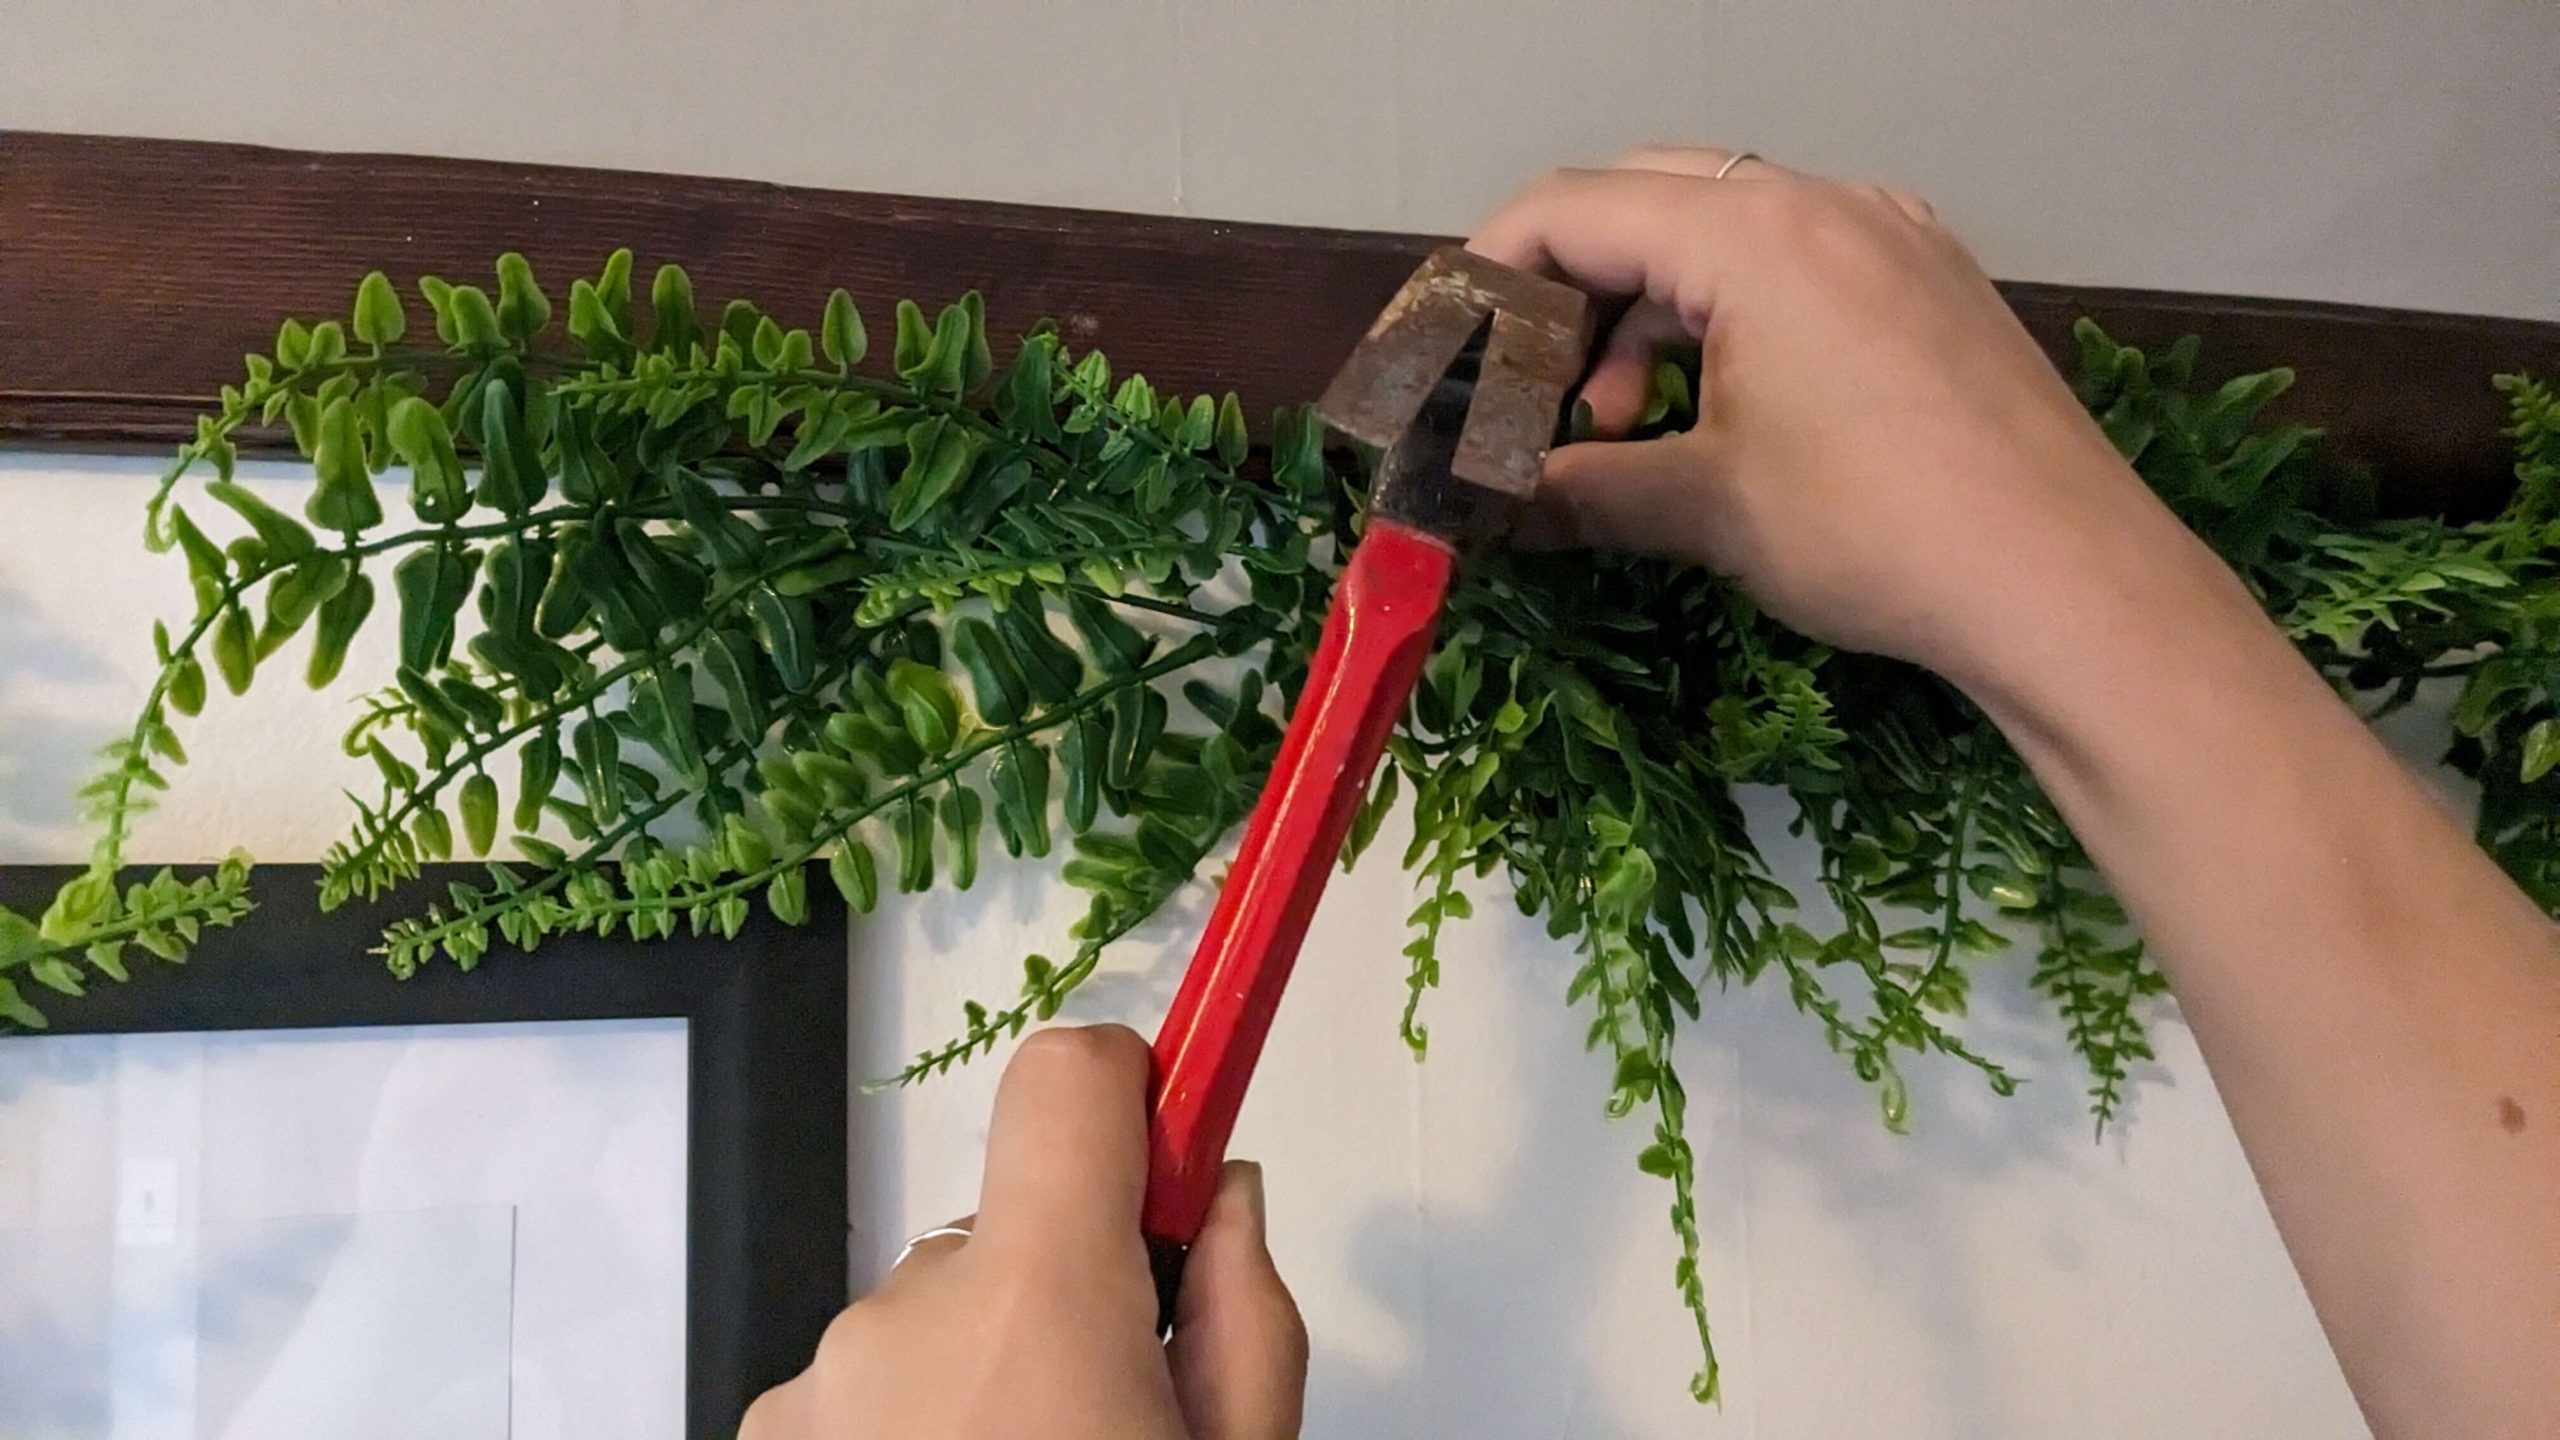 hammering greenery into a wall